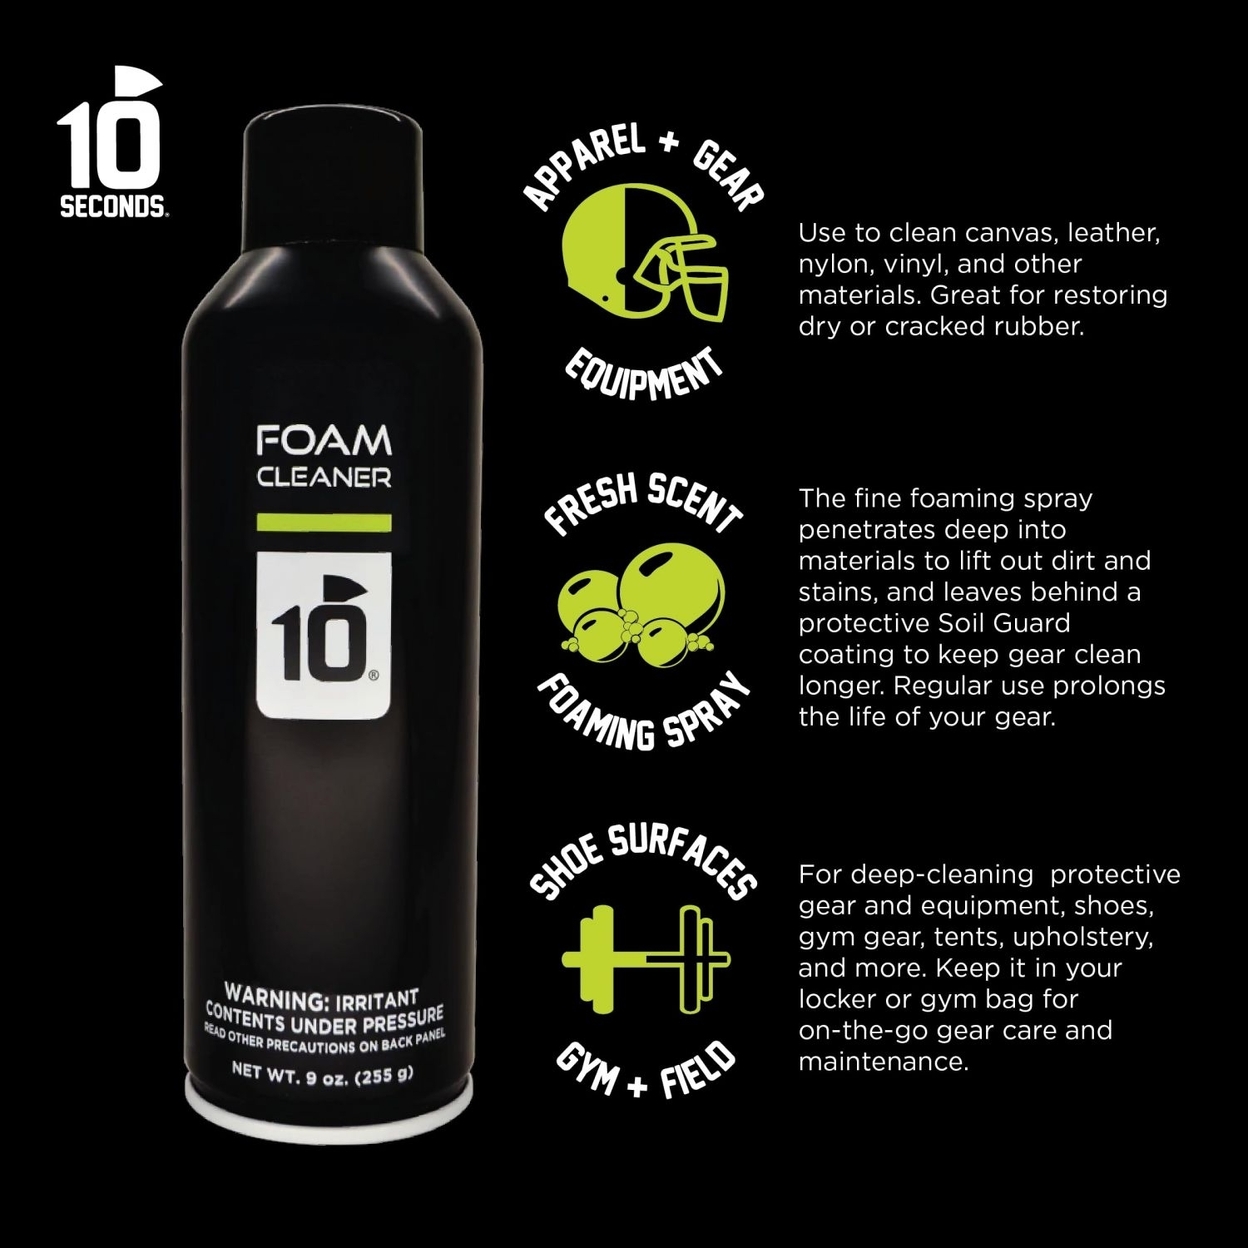 10 Seconds Foam Cleaner - Proline Foam Cleaner: Elite Foaming Formula For Sports Gear, Shoes, And More. Ideal For Leather, Rubber, Canvas, A